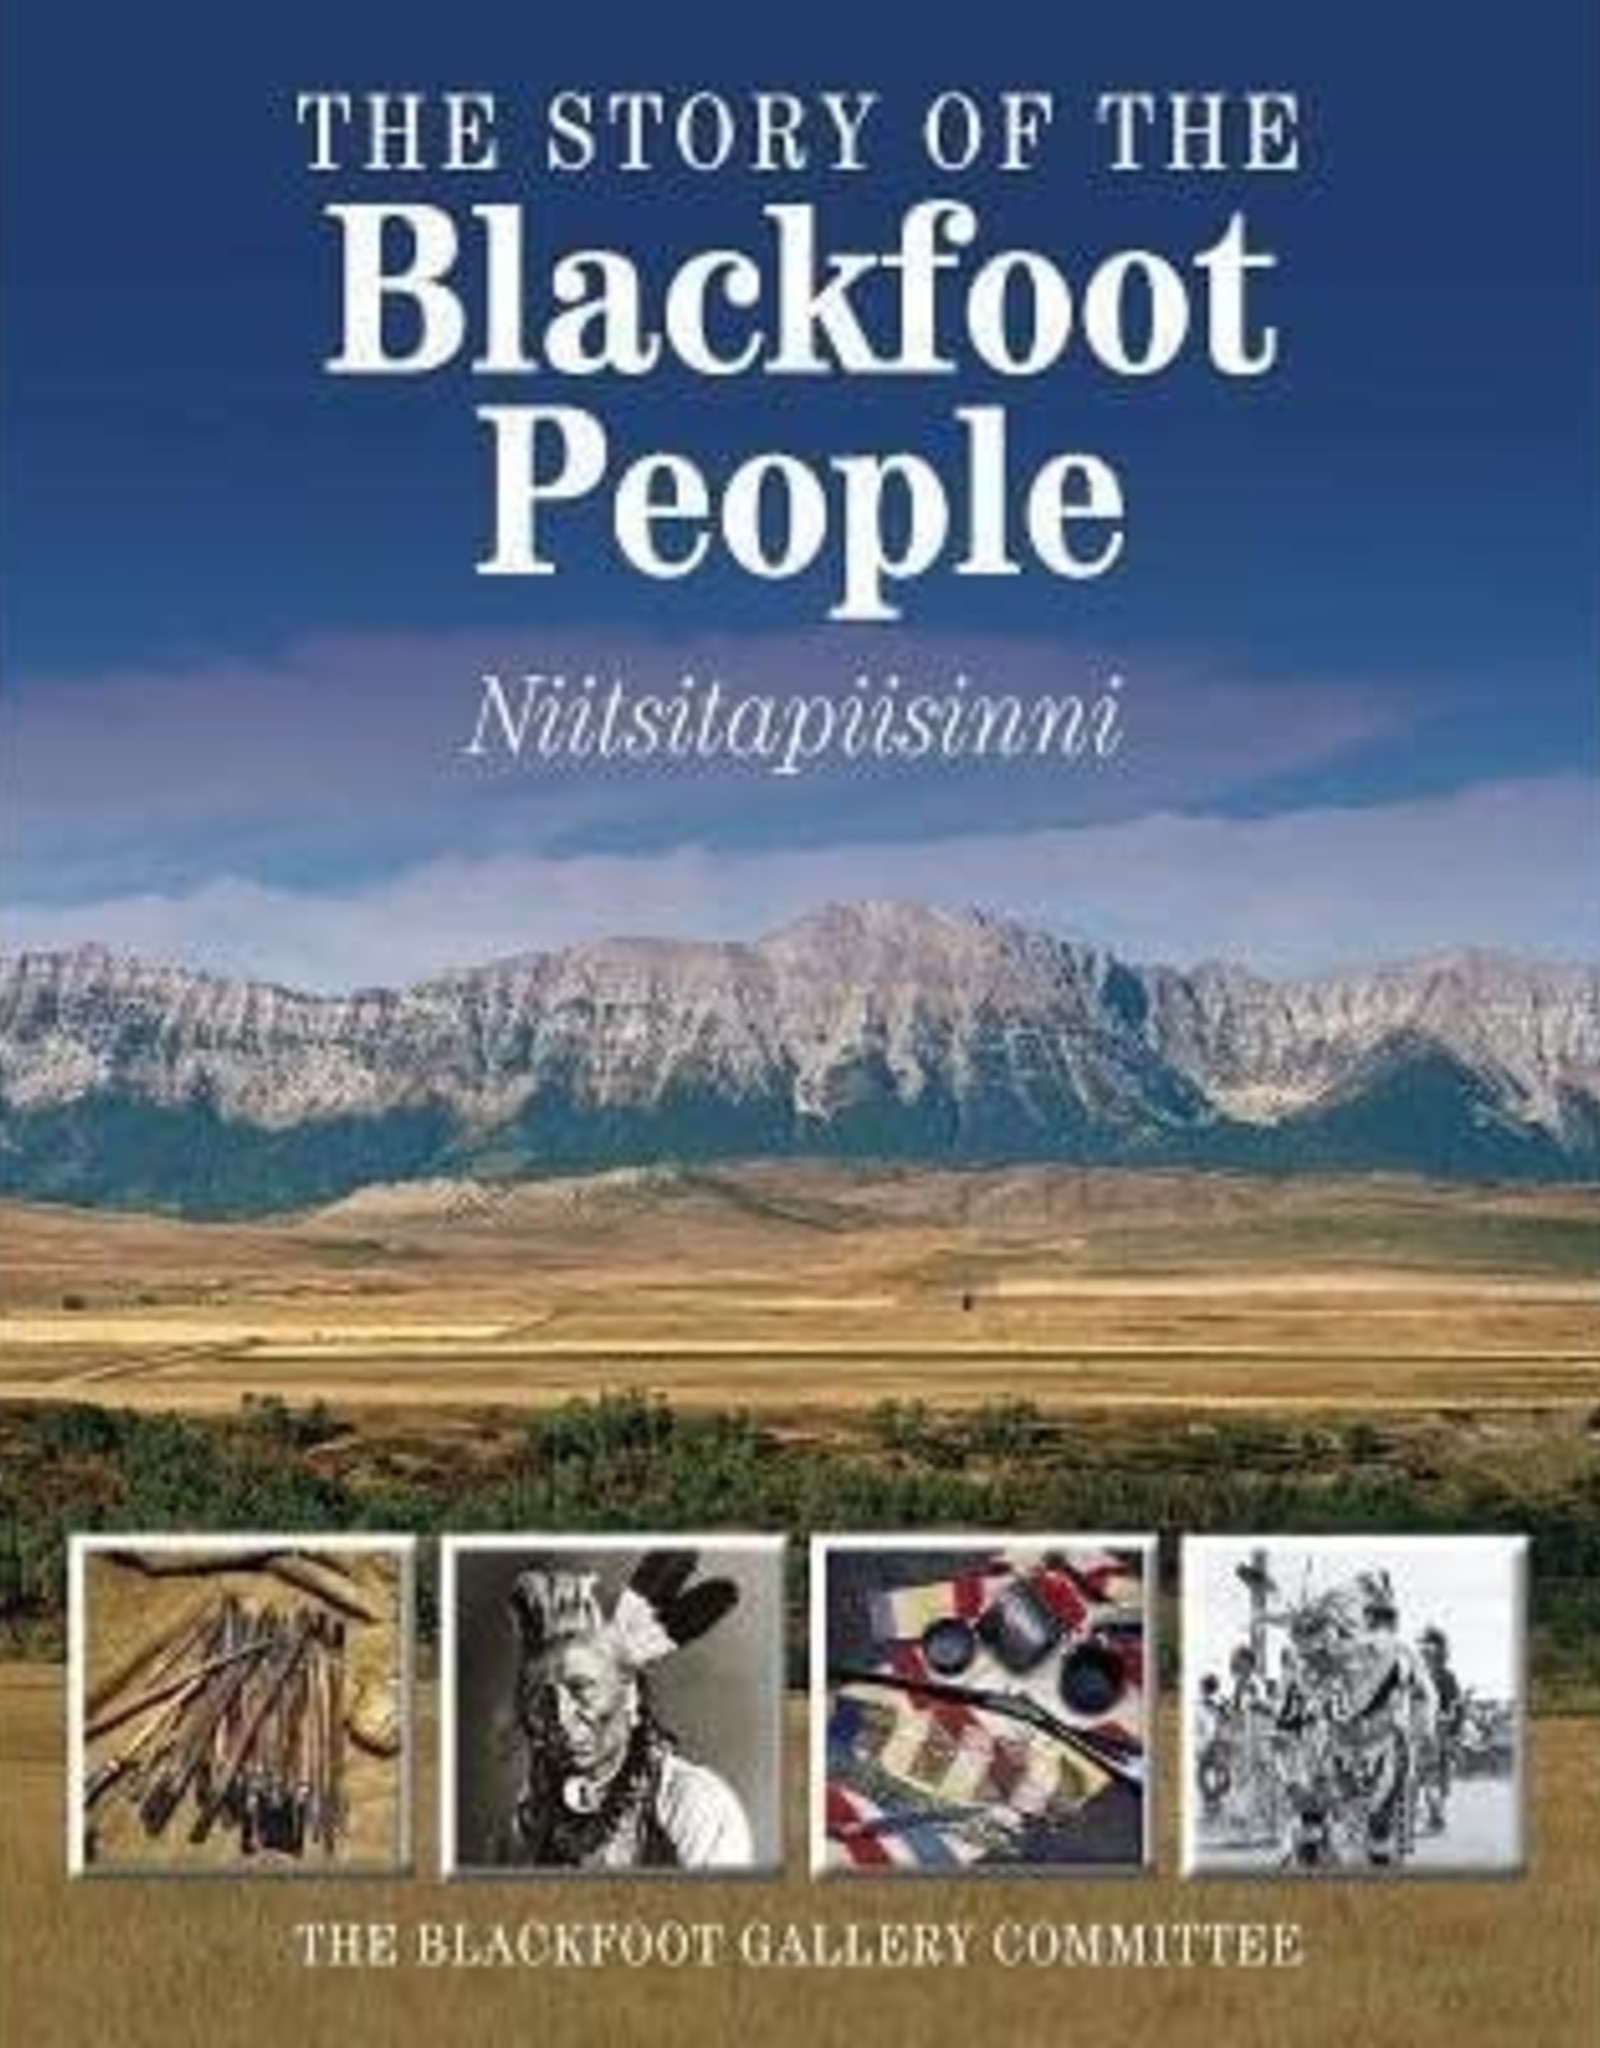 Firefly Story of the Blackfoot People by Firefly